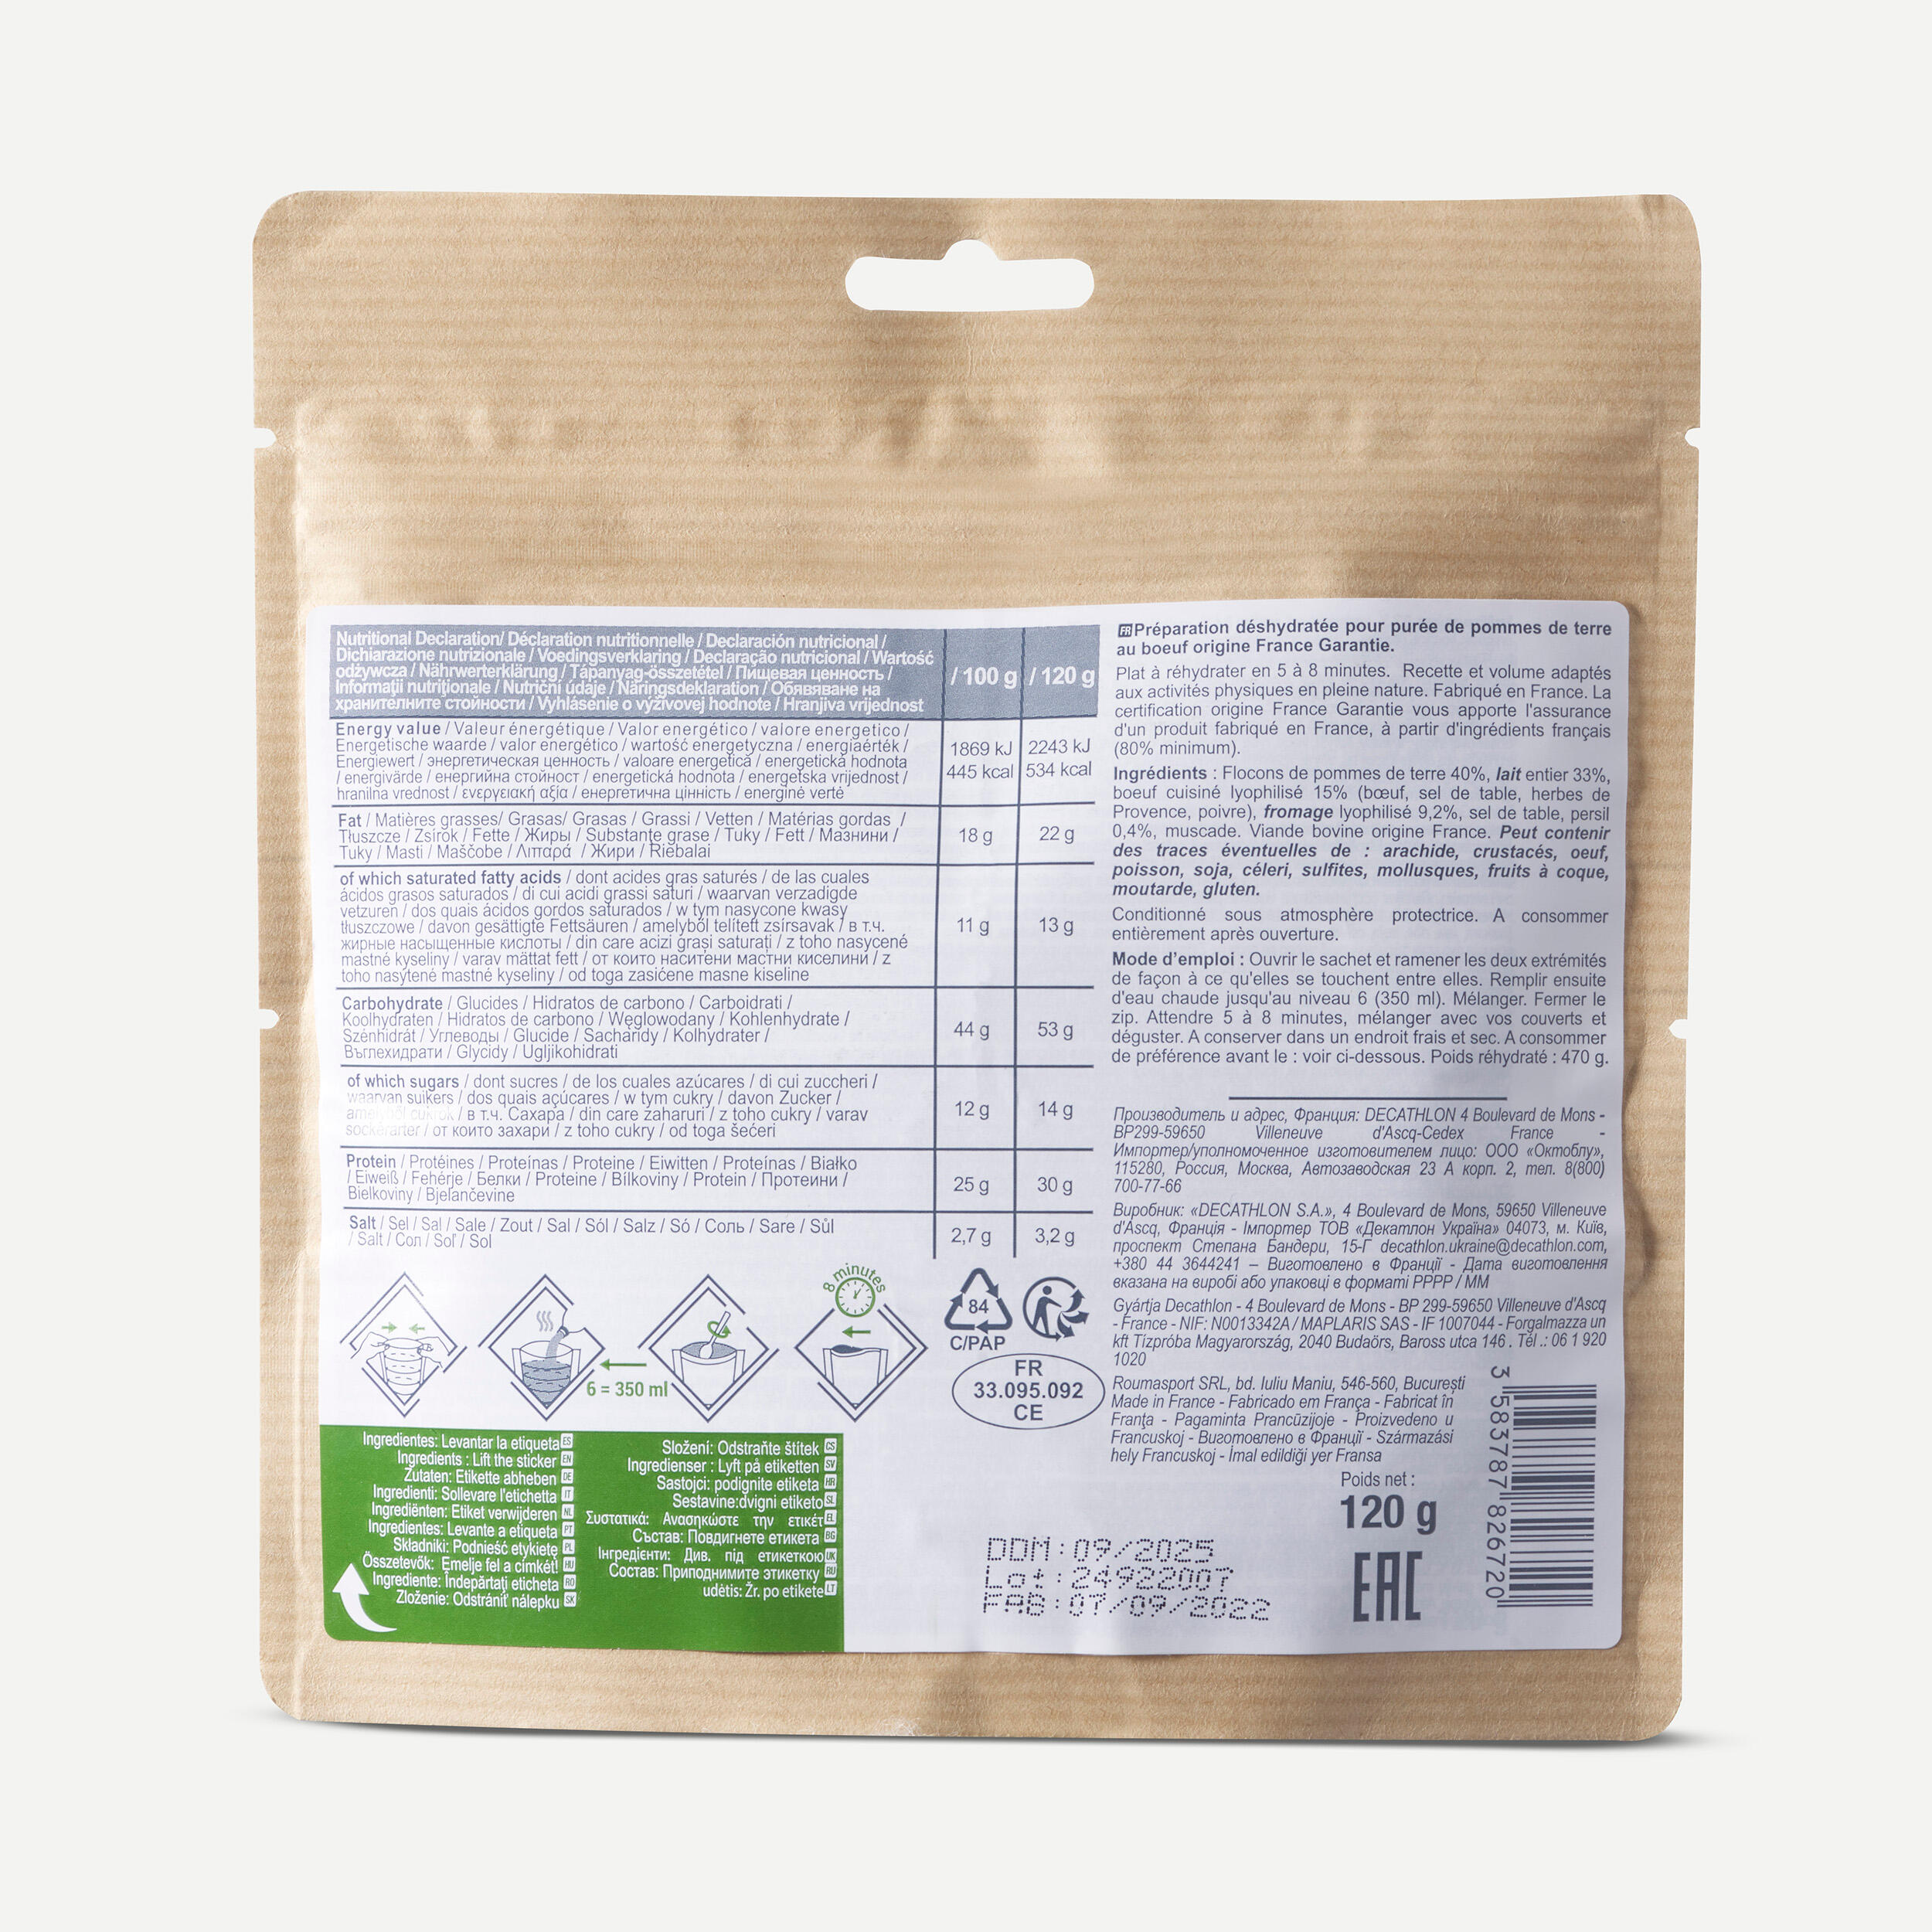 Beef and Mash Dehydrated Meal 120g 4/6